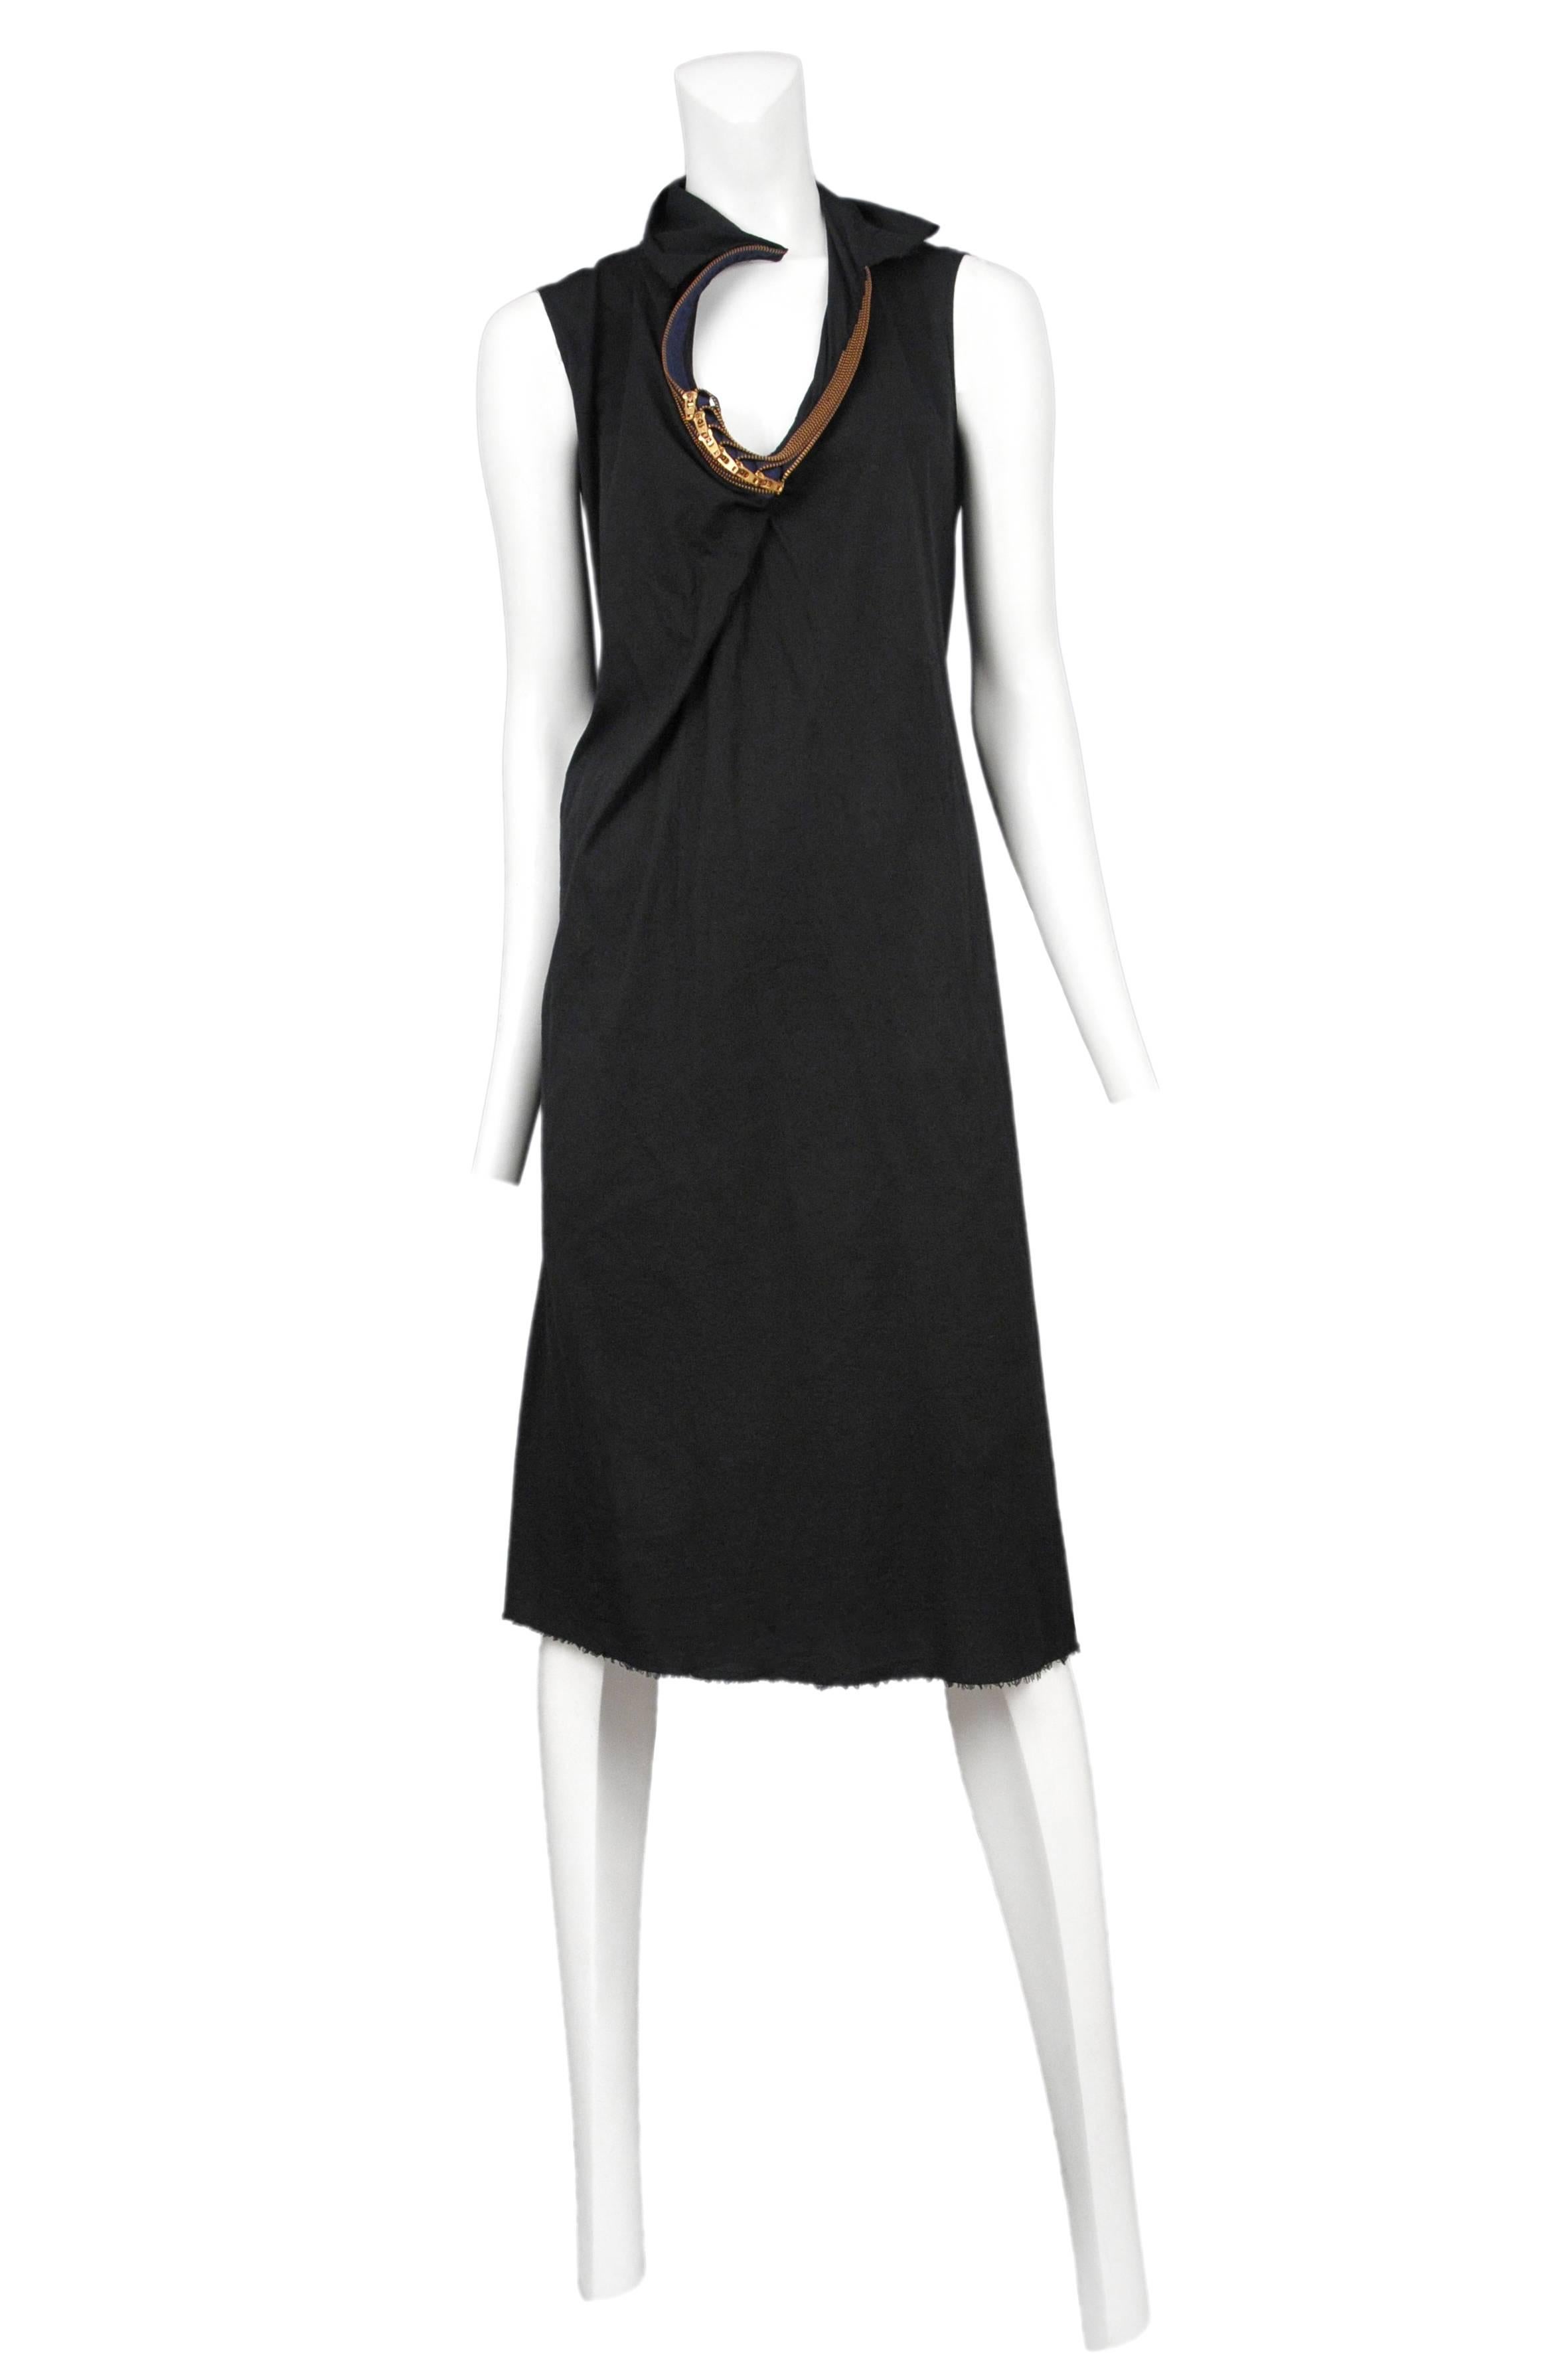 Vintage Junya Watanabe black cotton sleeveless knee length dress featuring multiple brass zippers encircling the collar. Runway piece from the Spring / Summer 2005 Collection.
Please inquire for additional images.